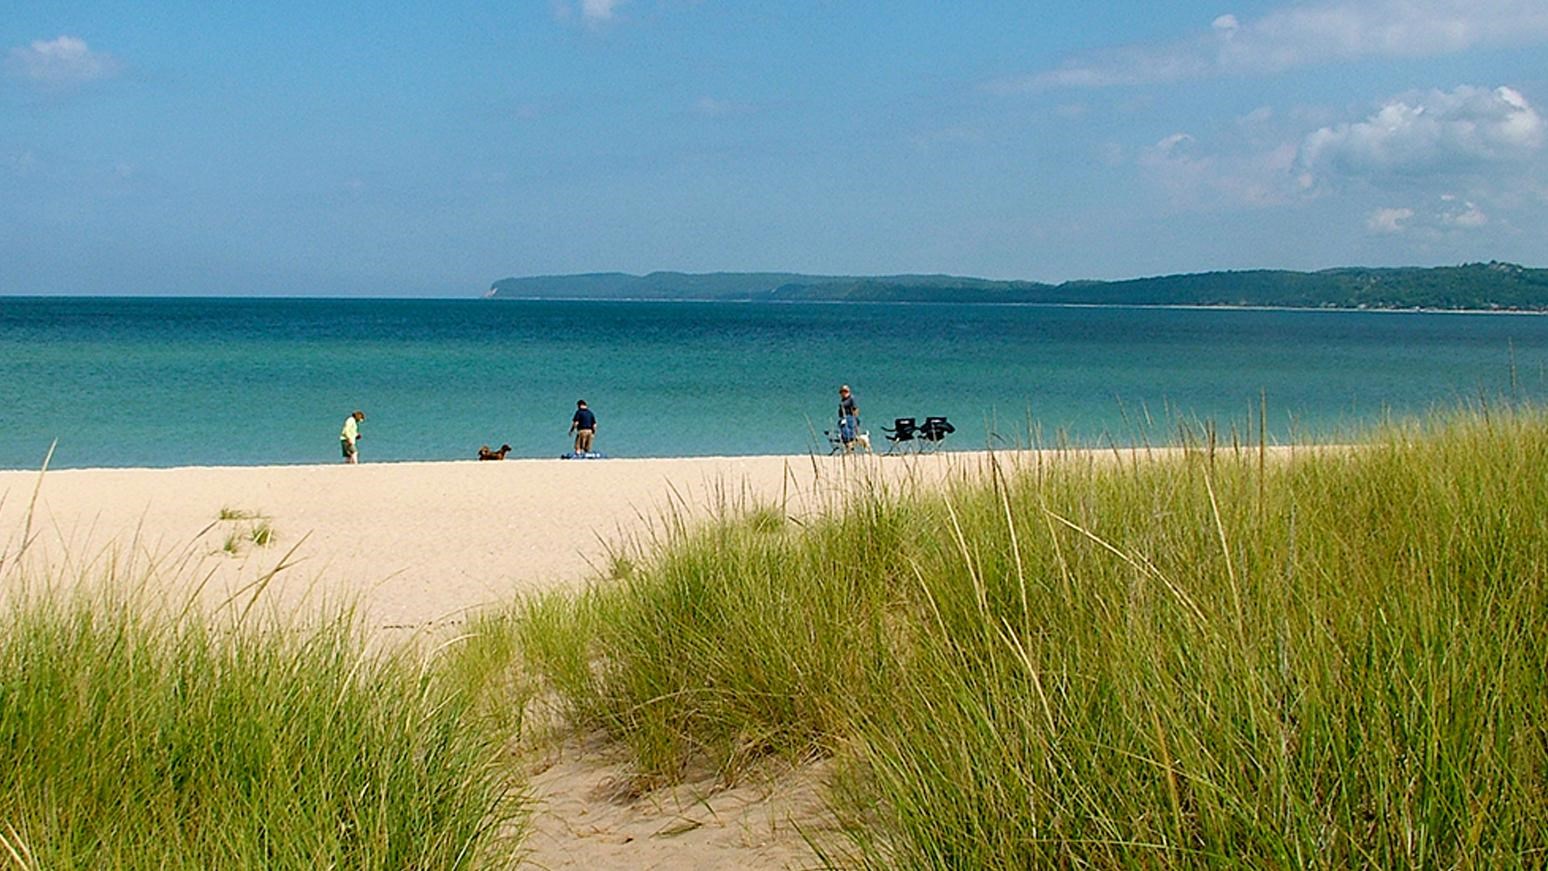 A sandy path cut through green dune grass leads to a sandy beach and turquoise blue lake